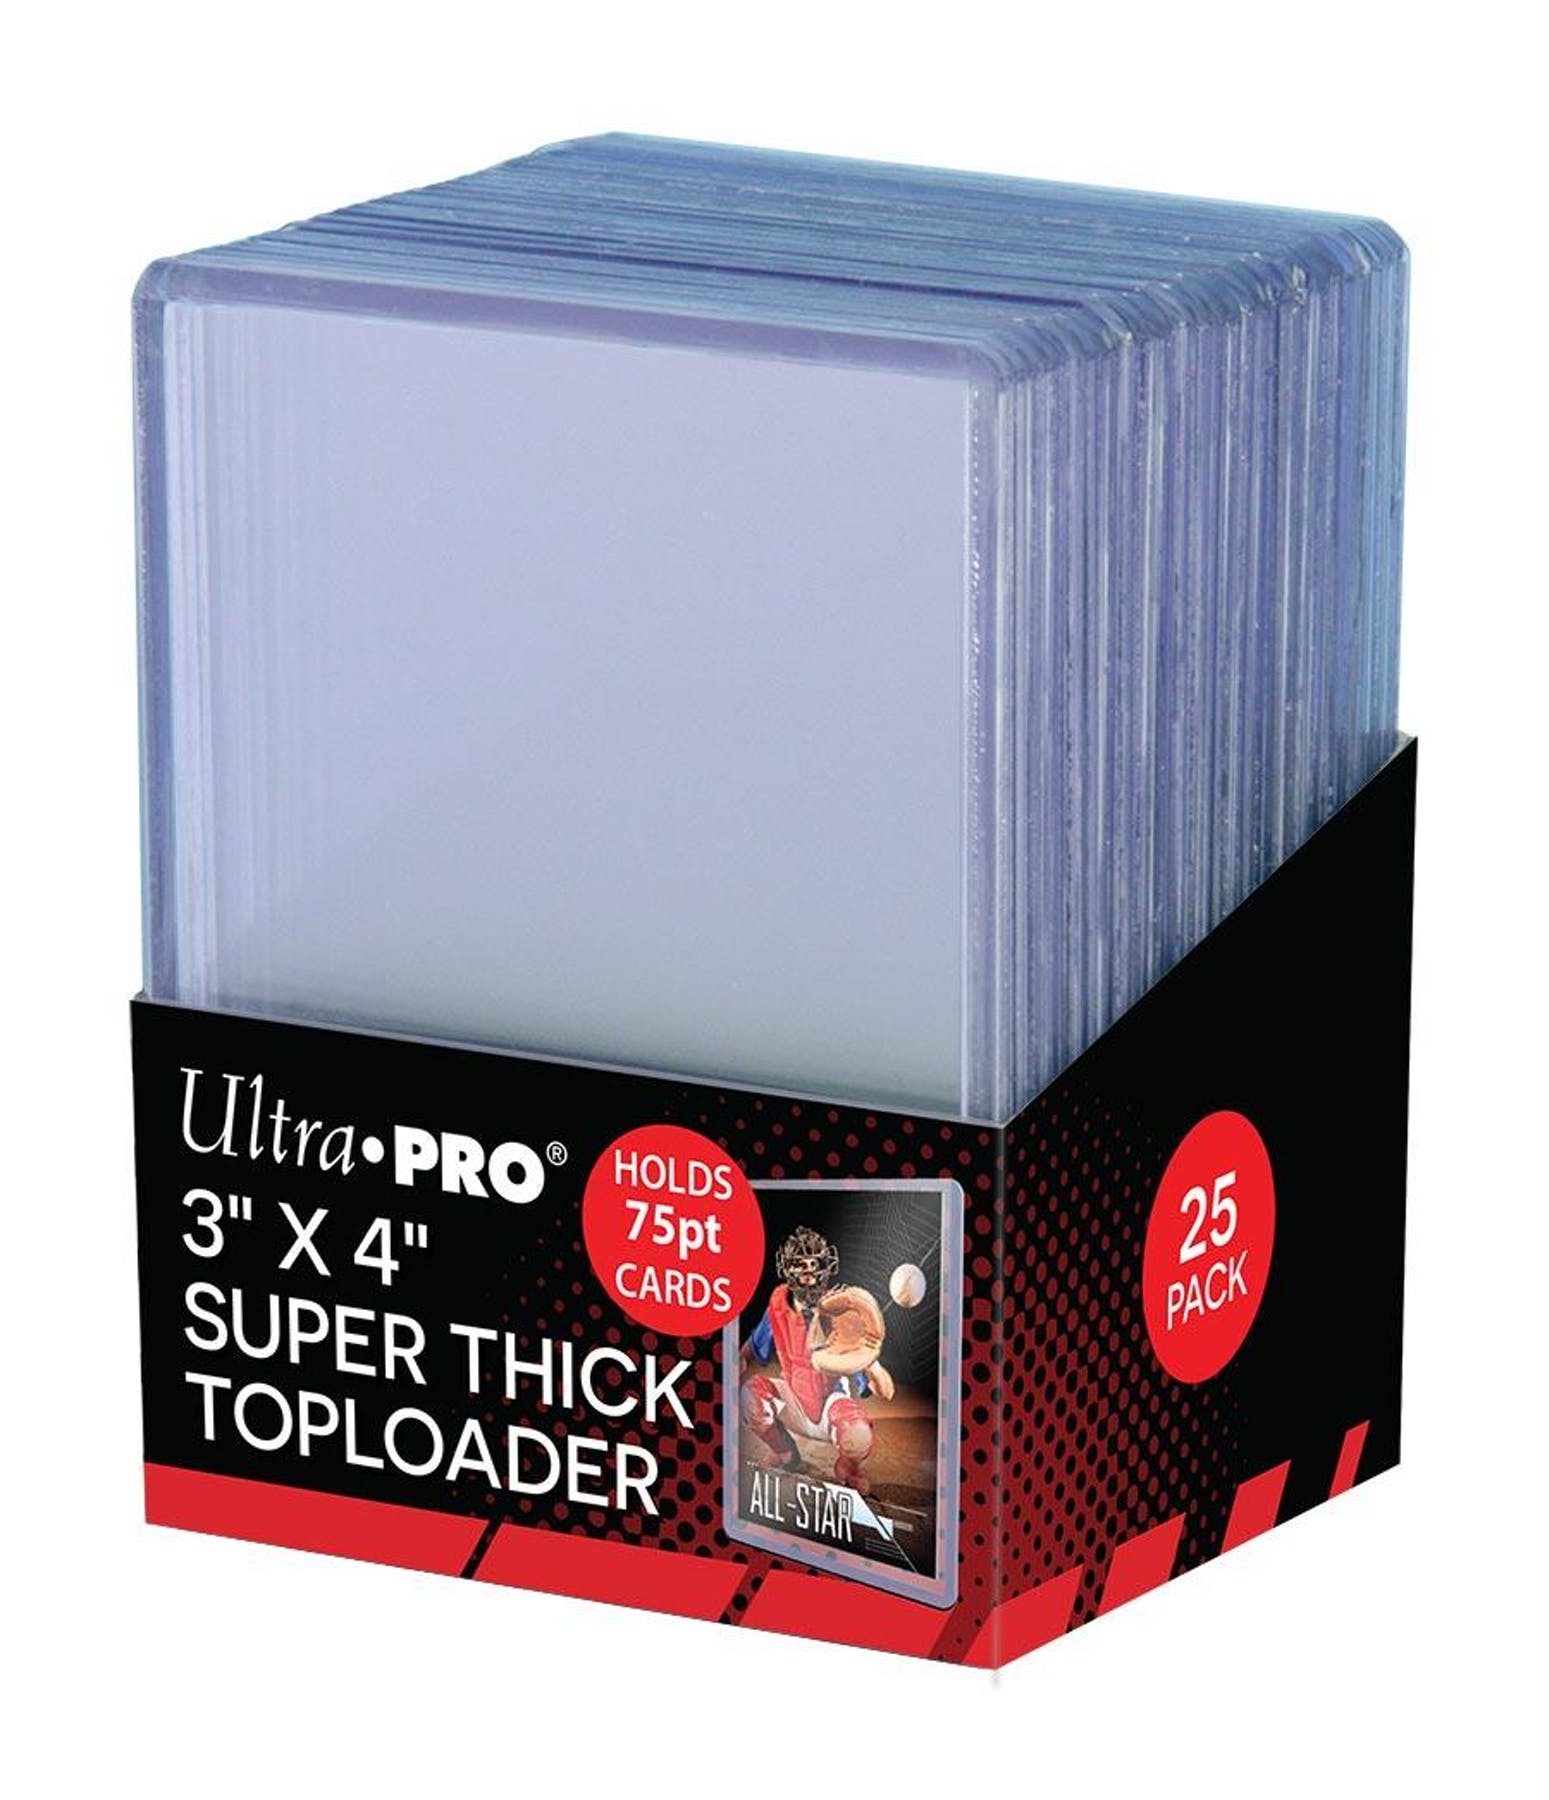 Ultra Pro Super Thick Toploaders 75pt. 3"x 4" (Lot of 5) - BigBoi Cards